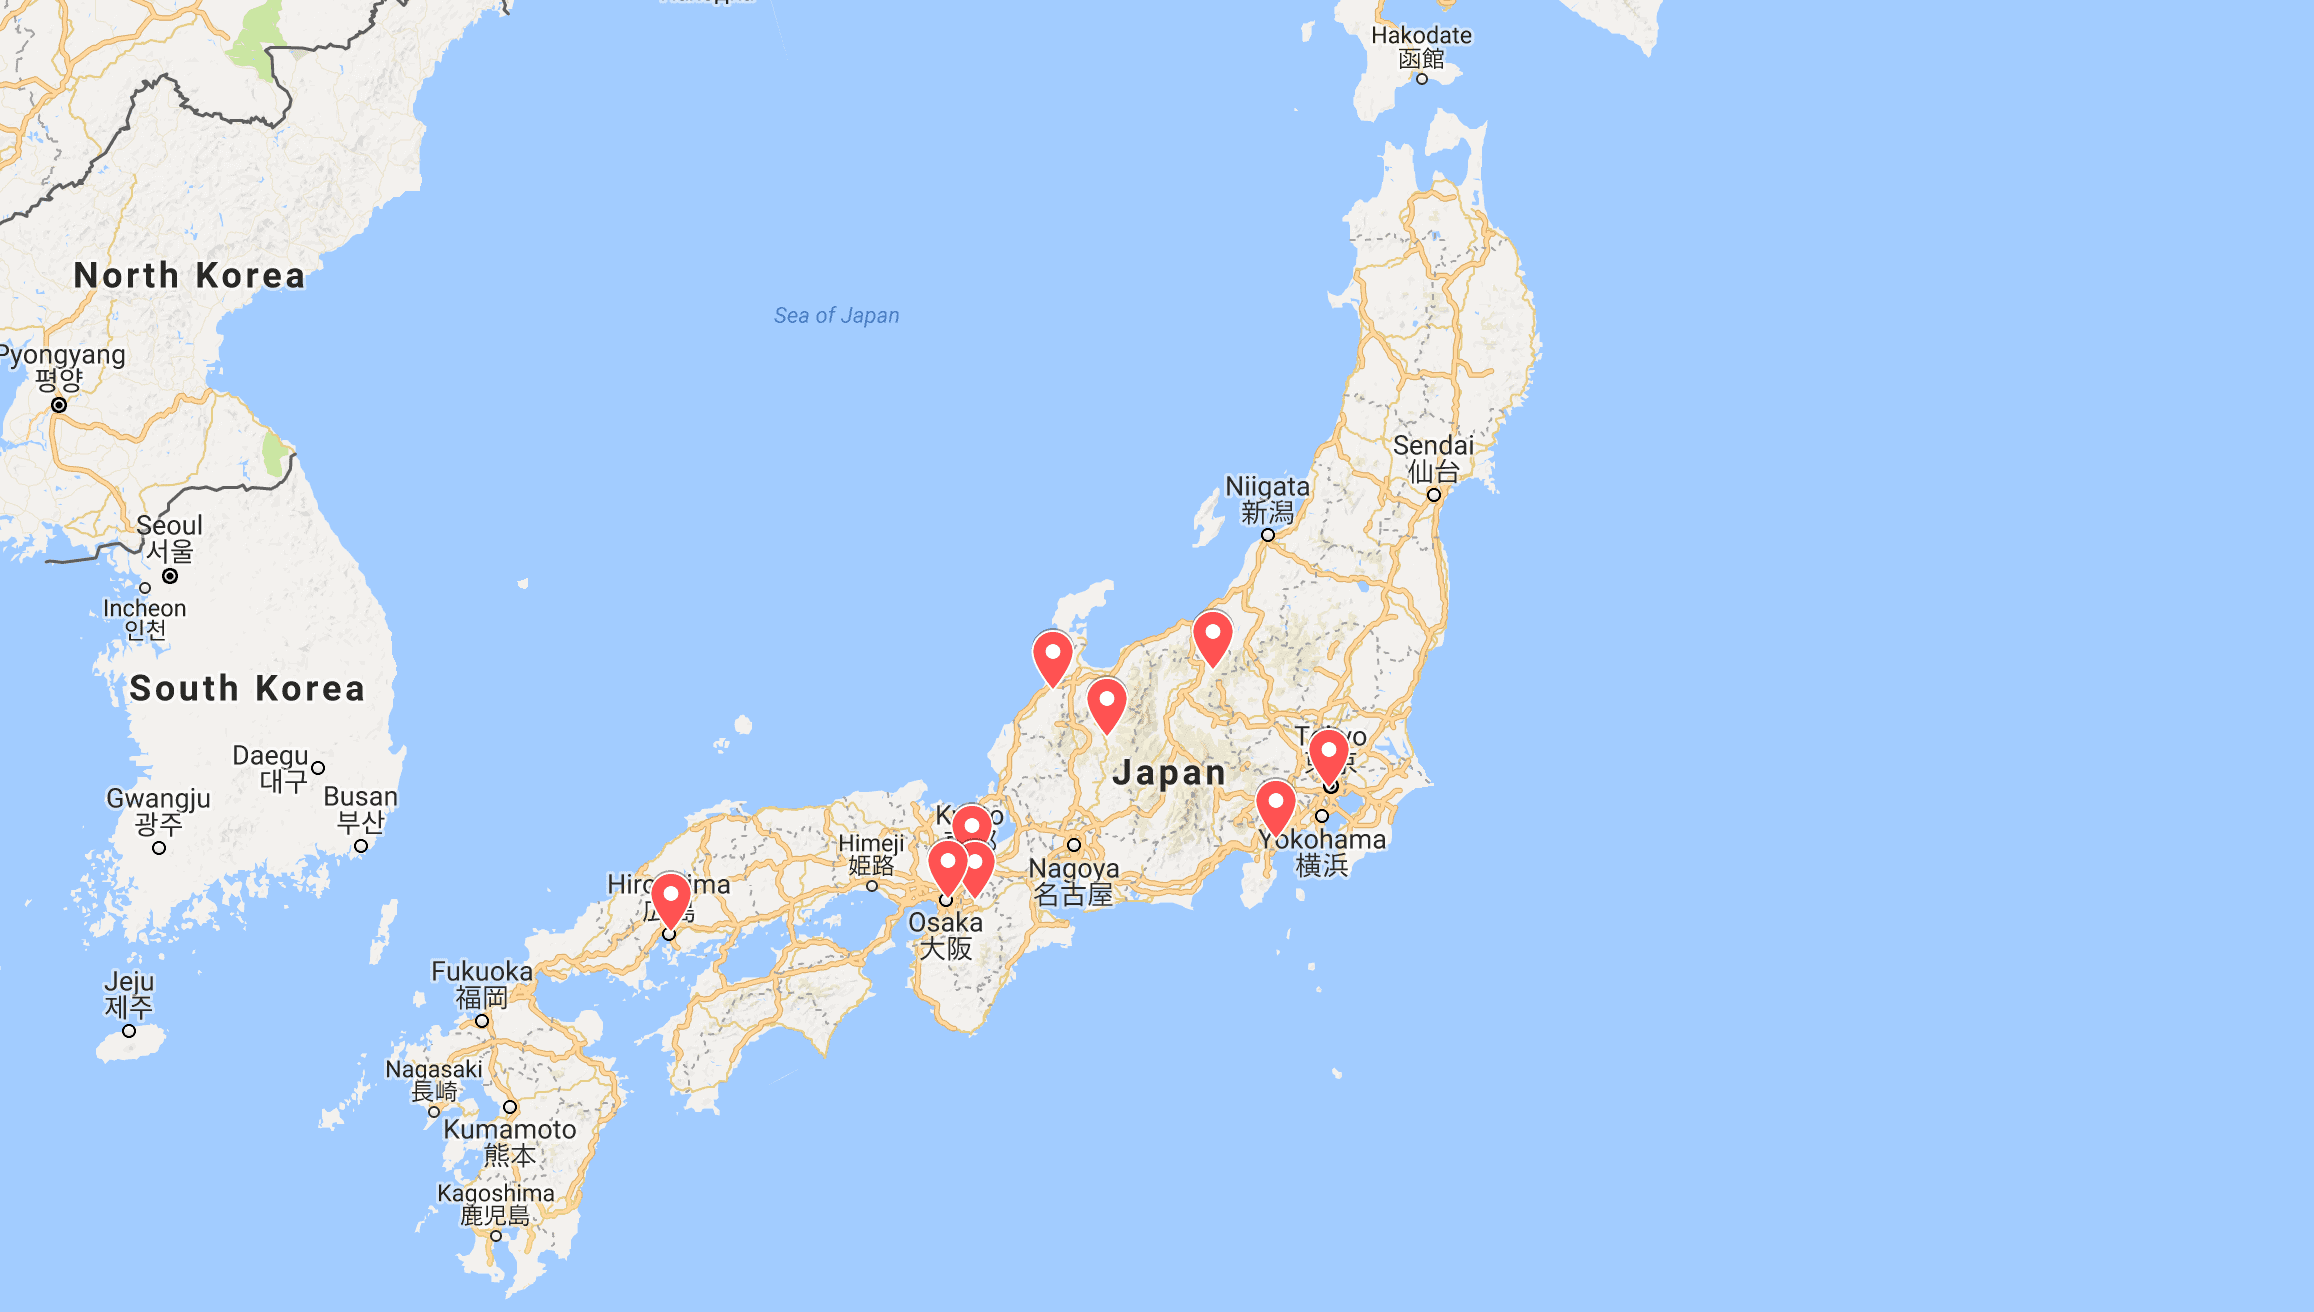 affordable trip to japan